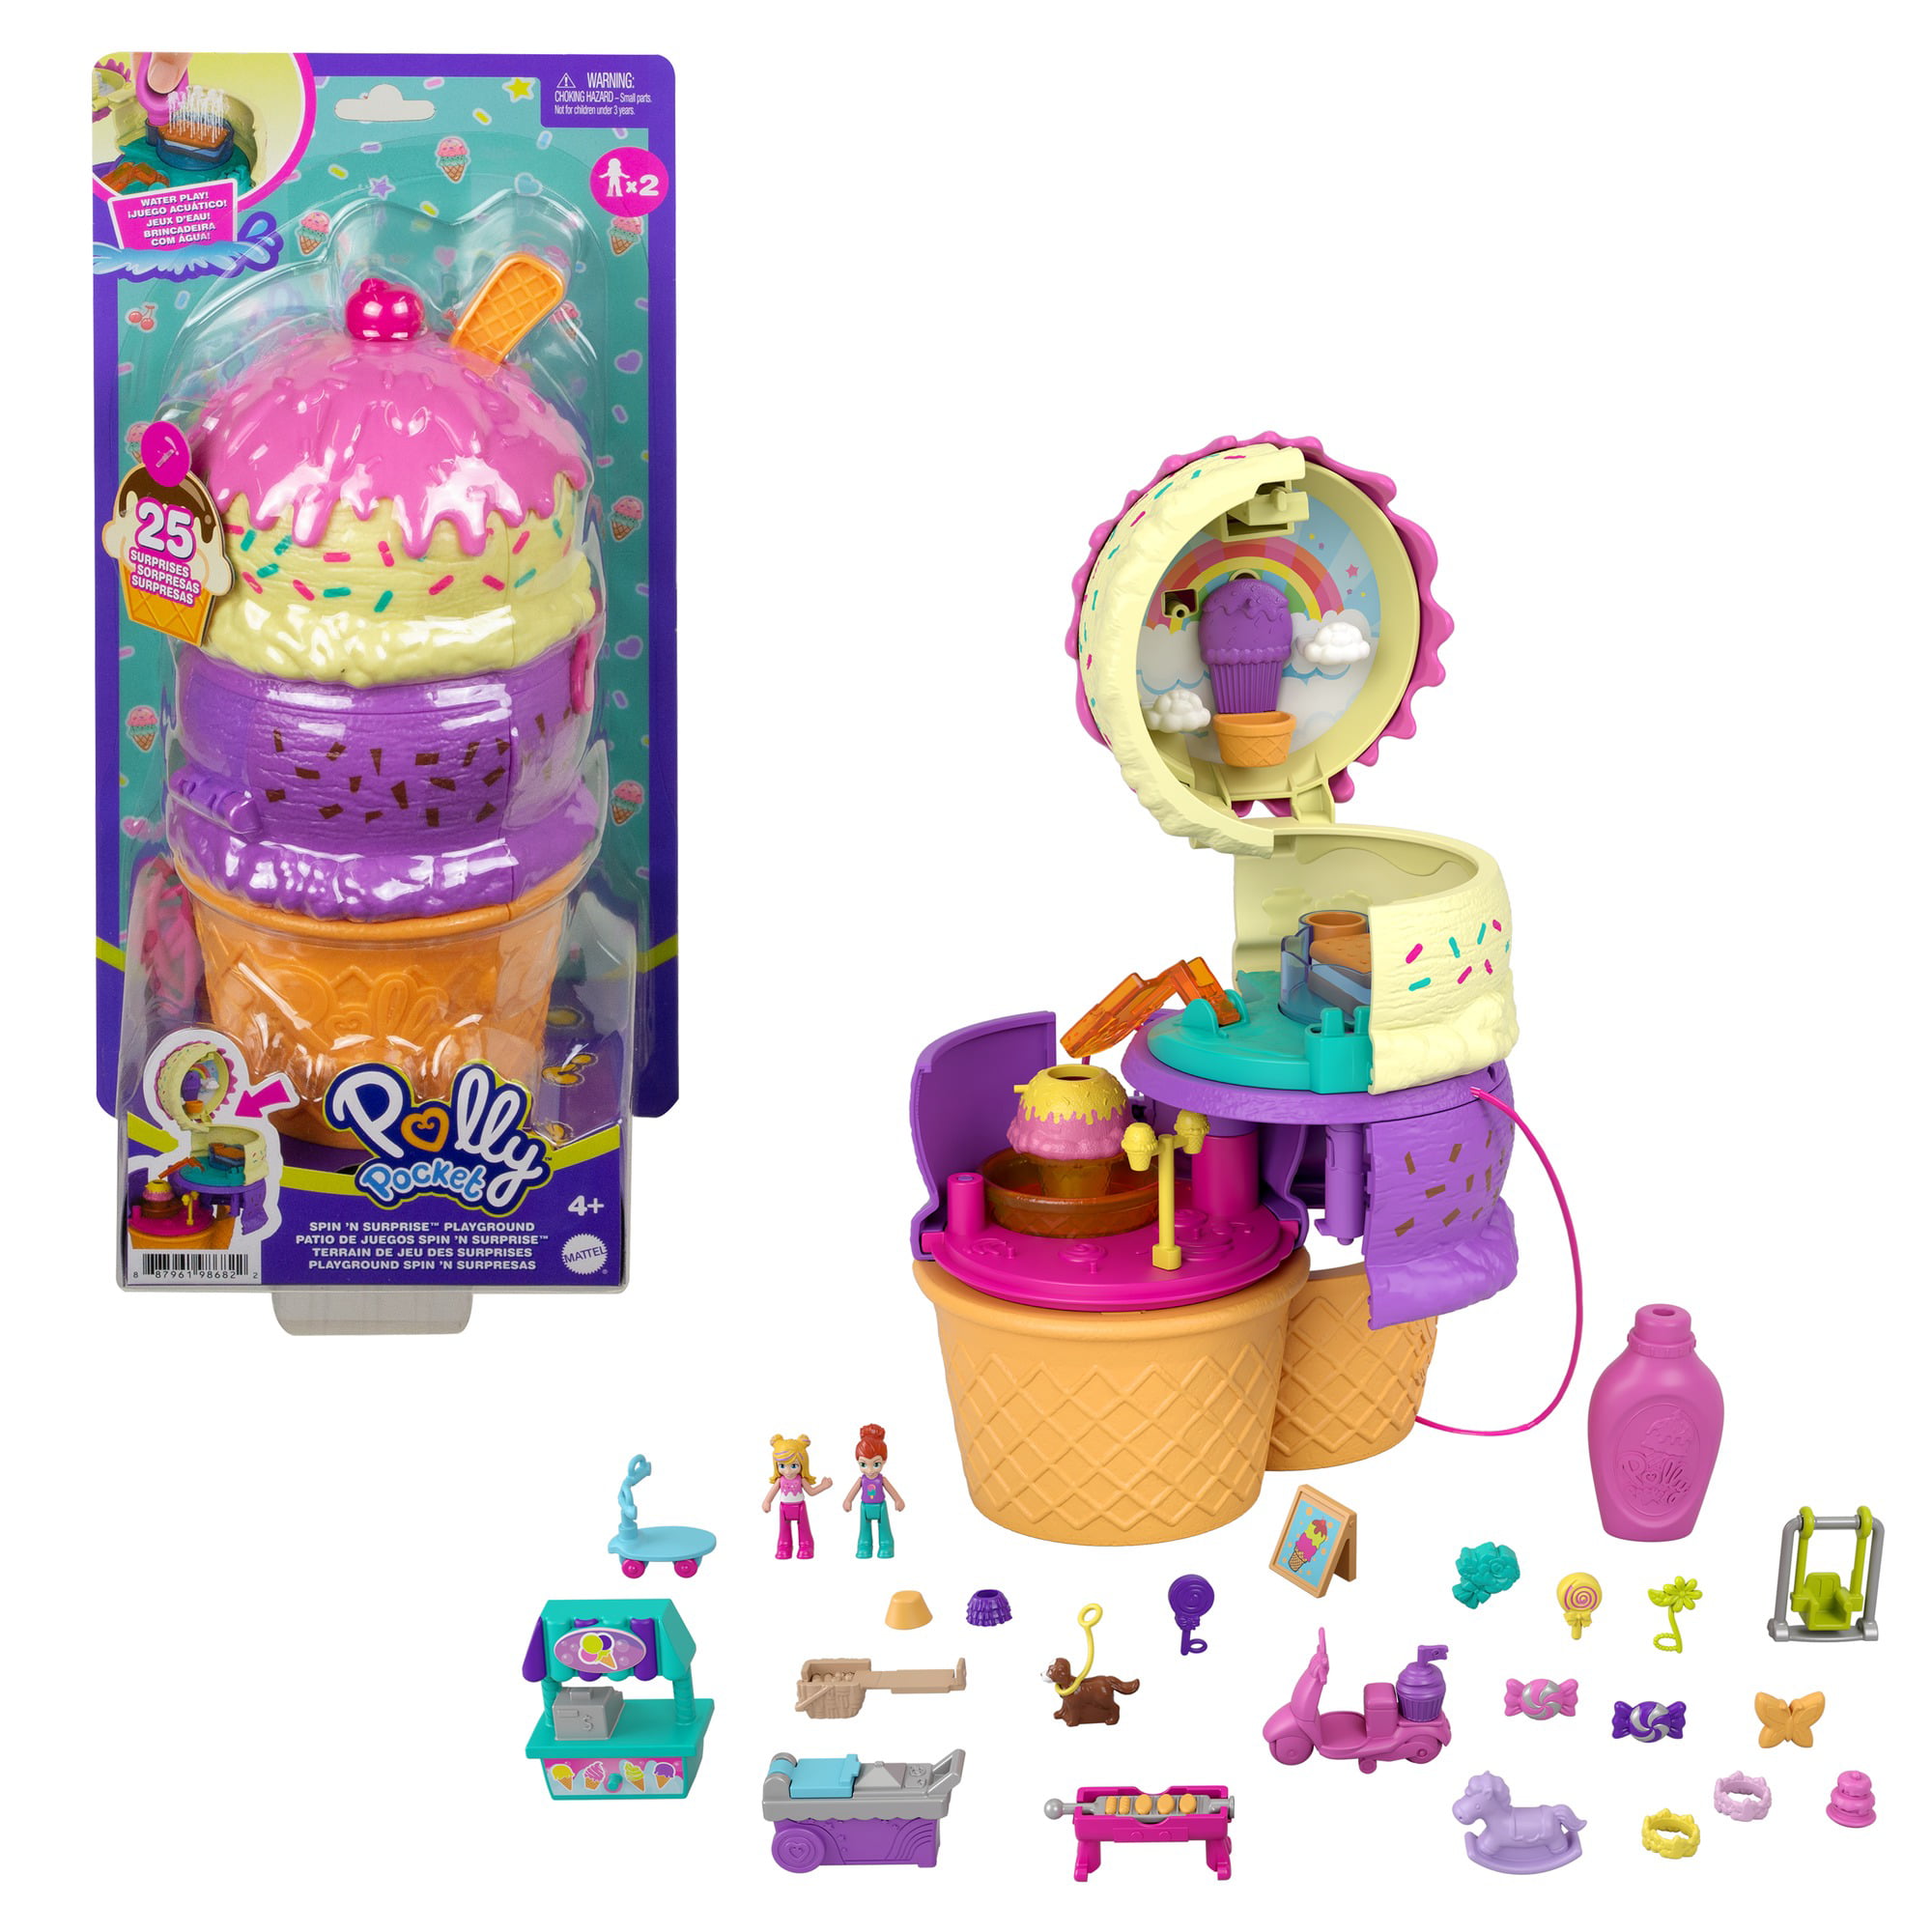 NEW asst. C CE Marked 4 Yrs Polly Pocket Tiny Pocket Places Compact x 3 